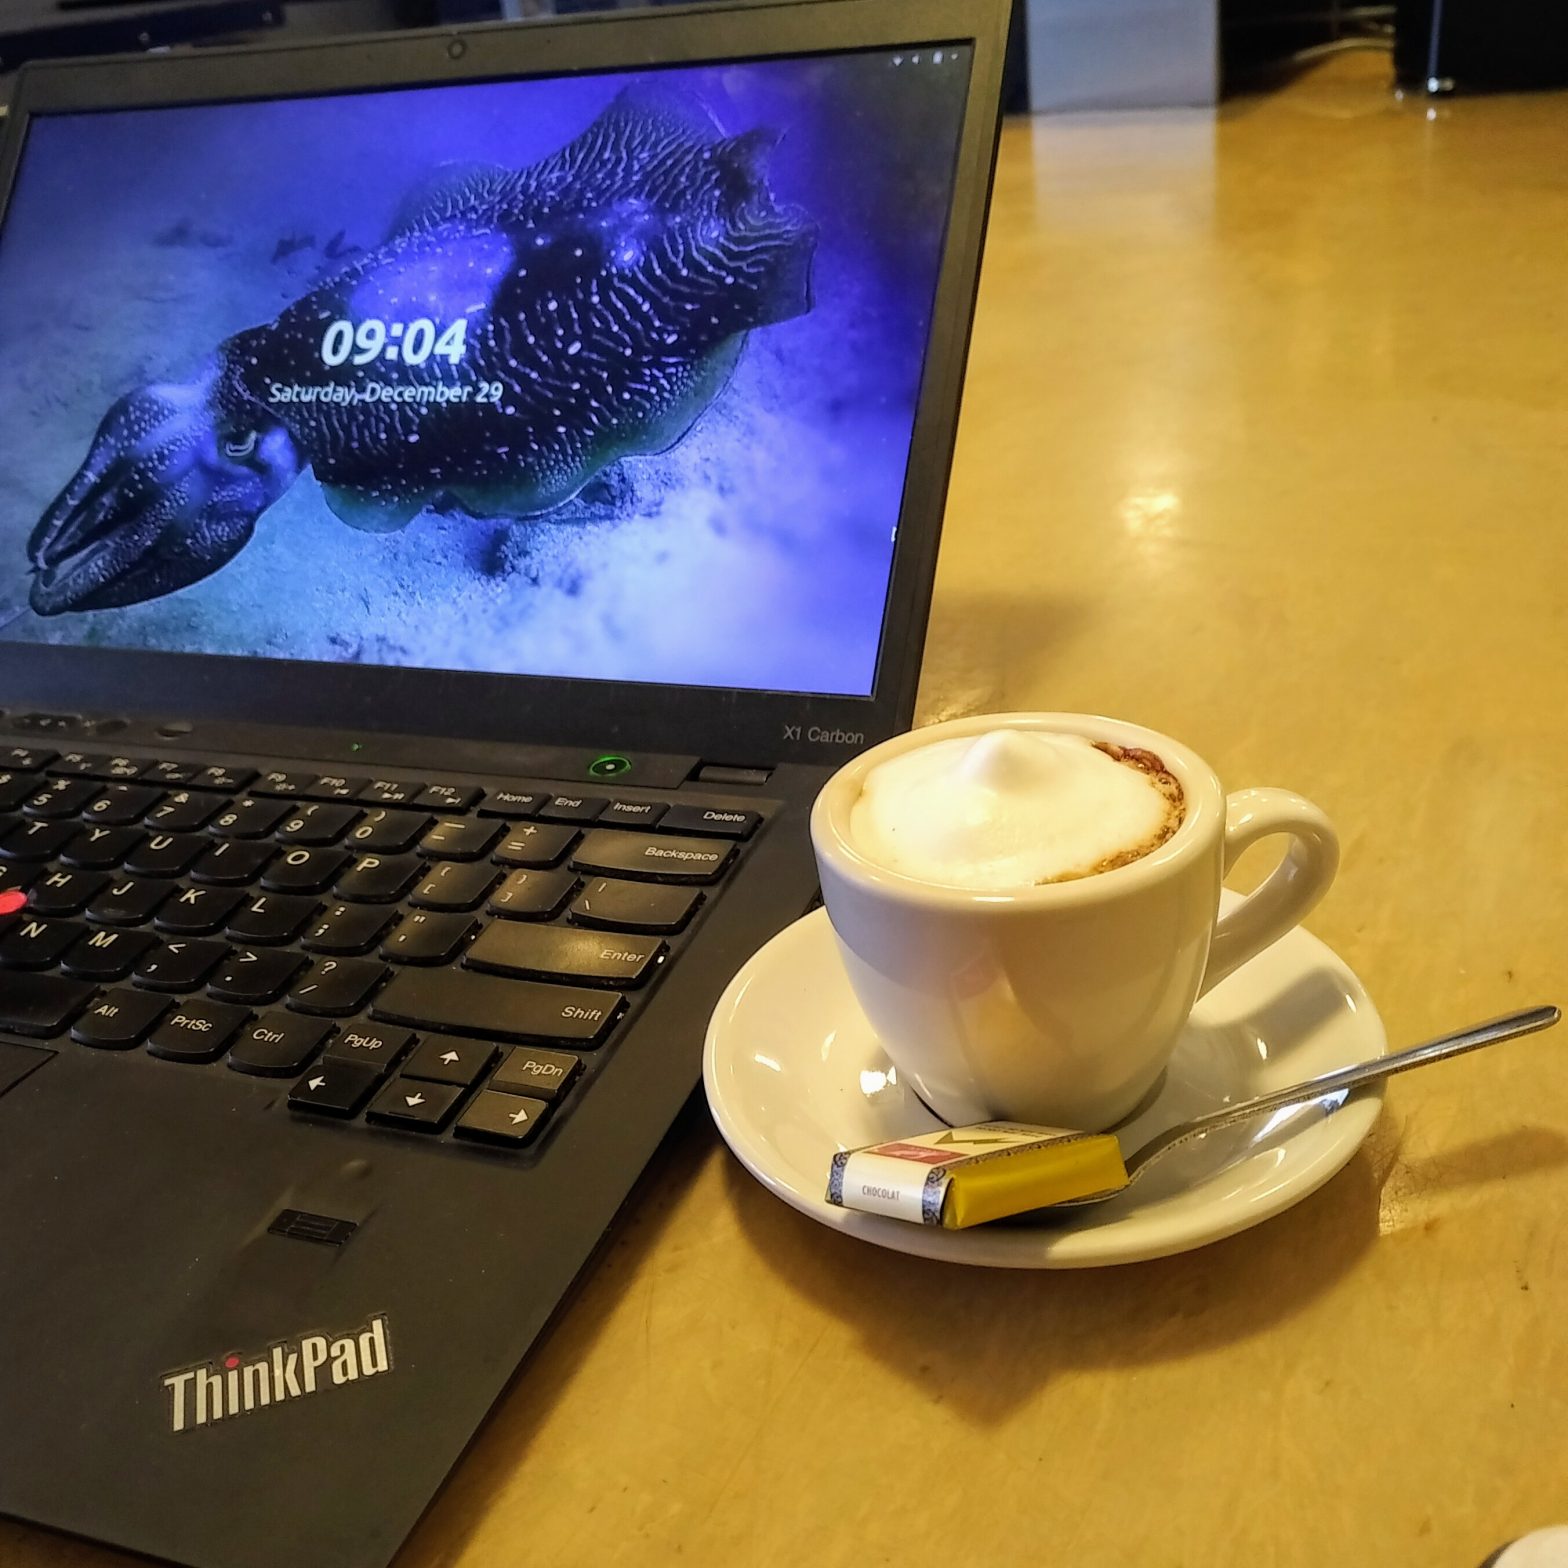 ThinkPad laptop with an image of a cuttlefish on screen, and a coffee adjacent